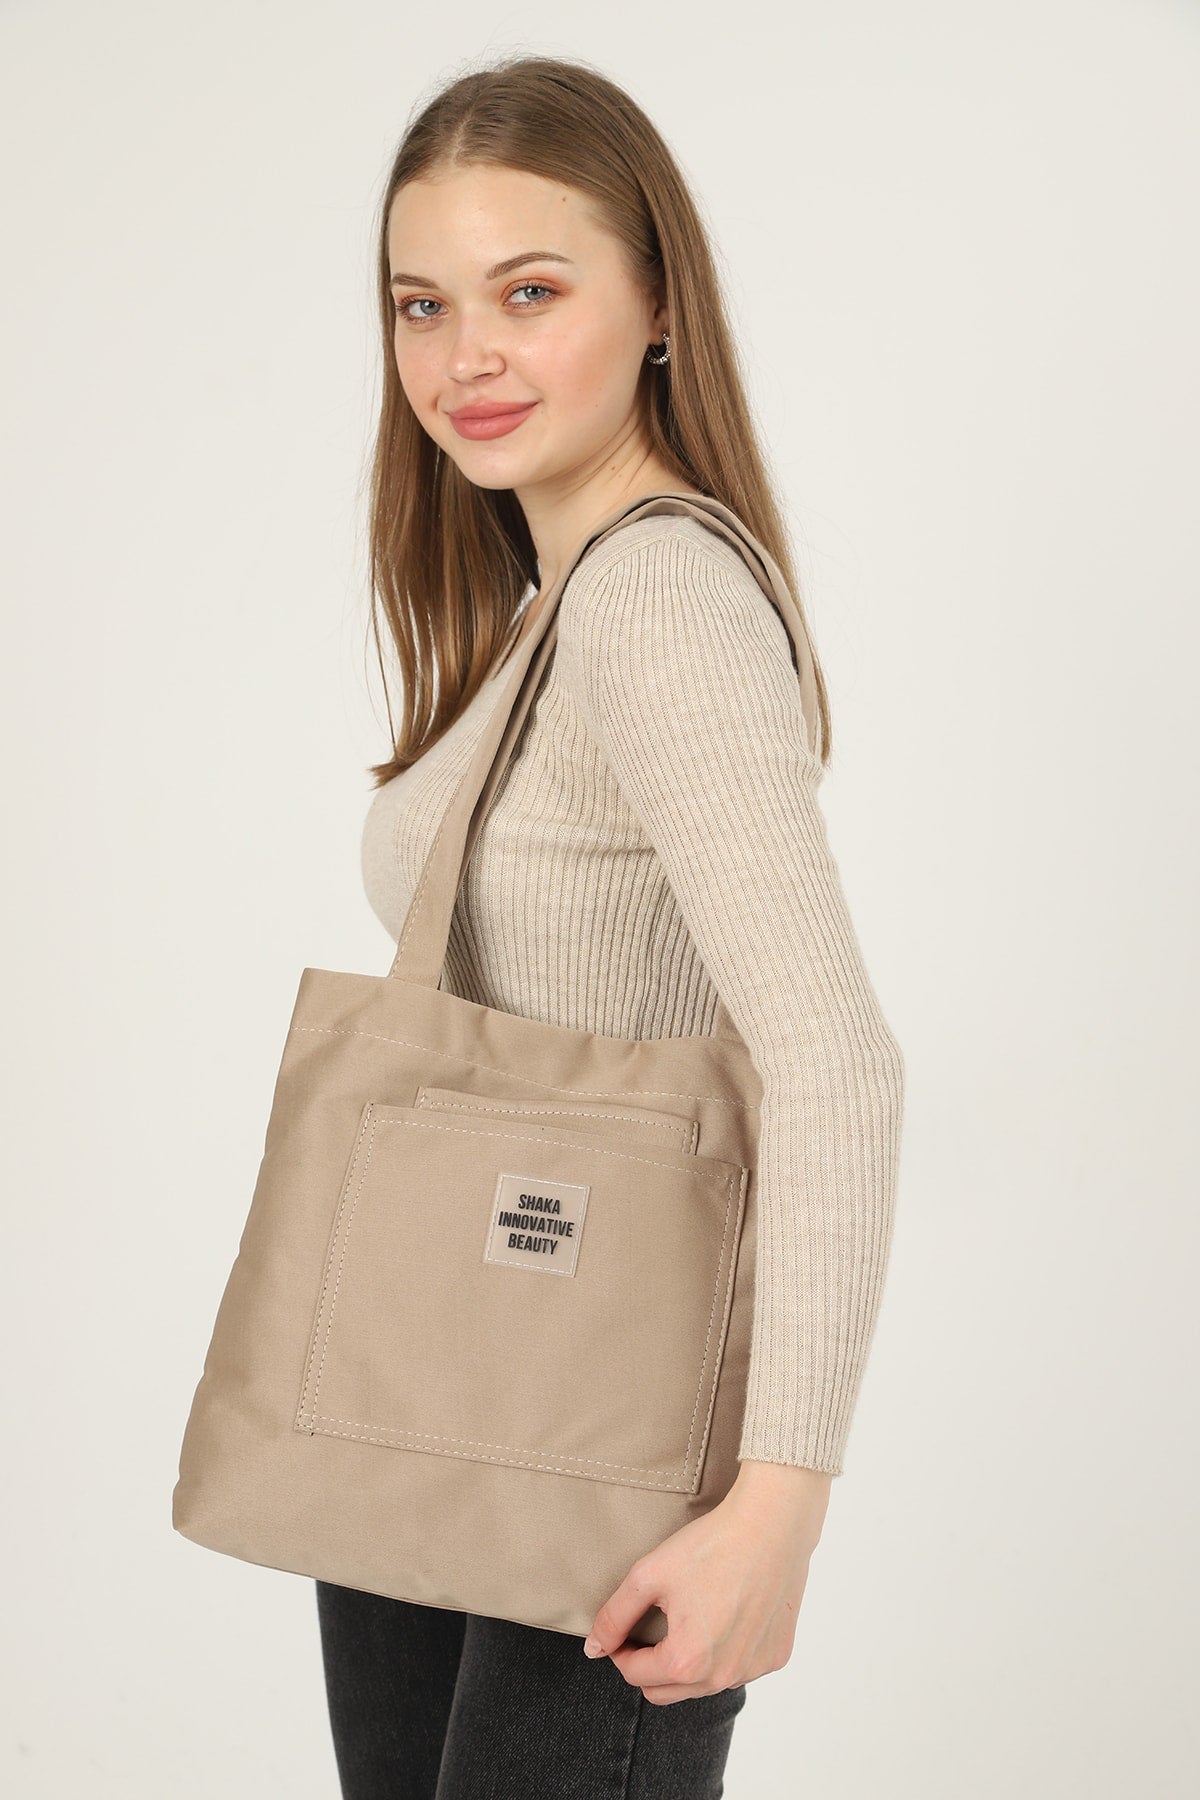 Mink U22 3-Compartment Front 2 Pocket Detailed Canvas Fabric Daily Women's Arm And Shoulder Bag B:35 E:35